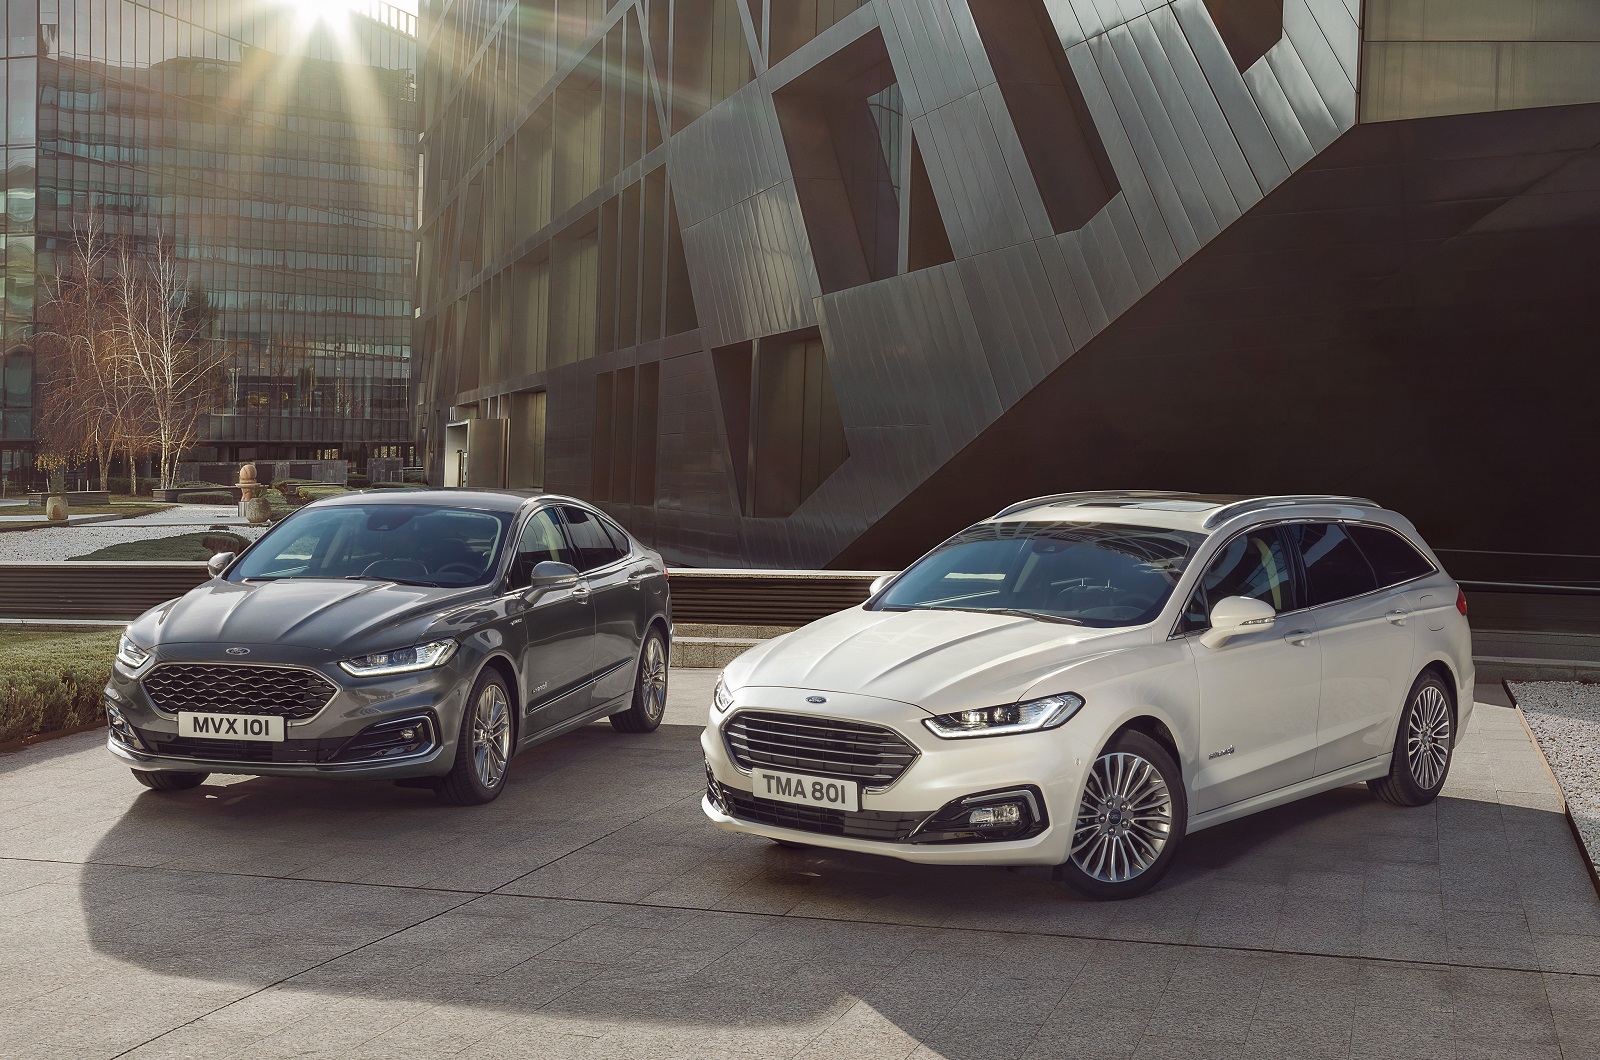 <p>Citing “changing customer preferences,” Ford confirmed in early 2021 that it will stop making the Mondeo for the European market in <strong>March 2022</strong>. It told Autocar that sales fell to <strong>2400 units</strong> in 2020, which represents little more than a rounding error. </p>